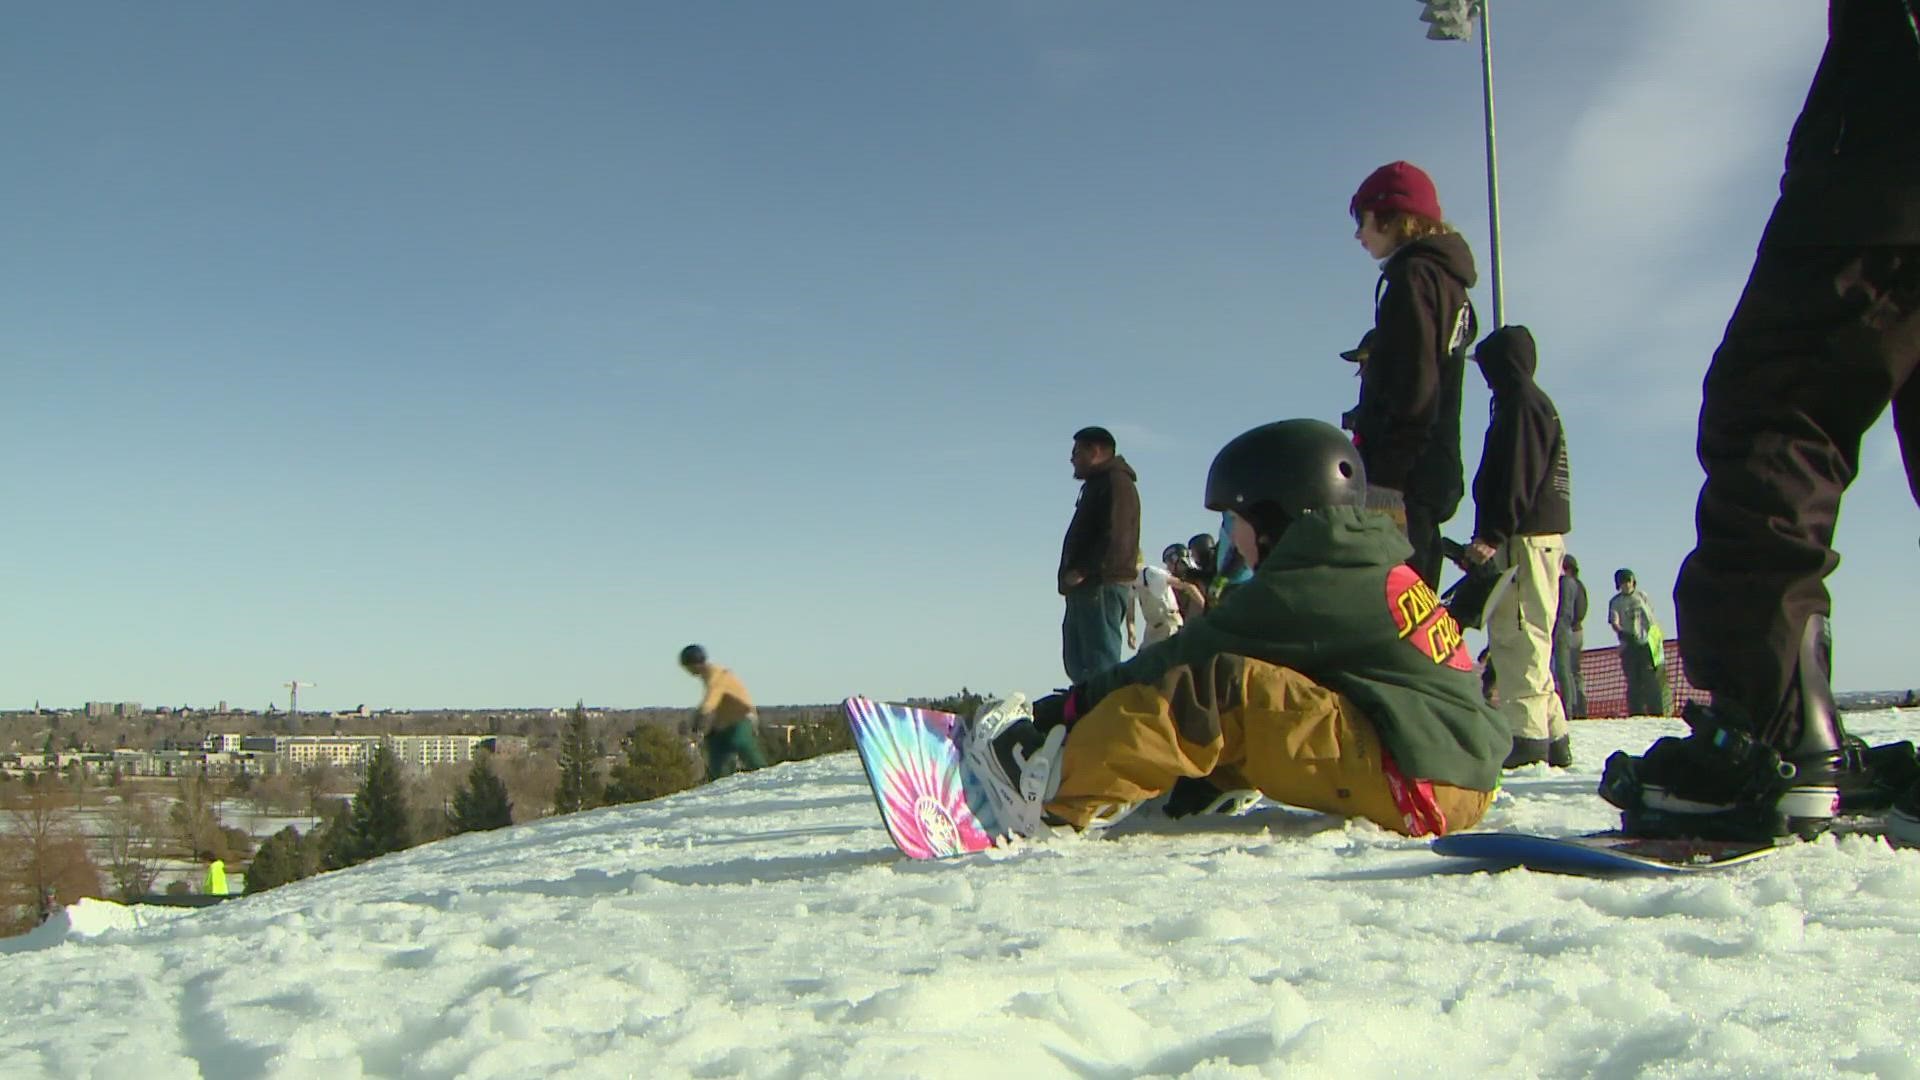 It's a park full of free skiing and snowboarding in Denver for all ski levels.